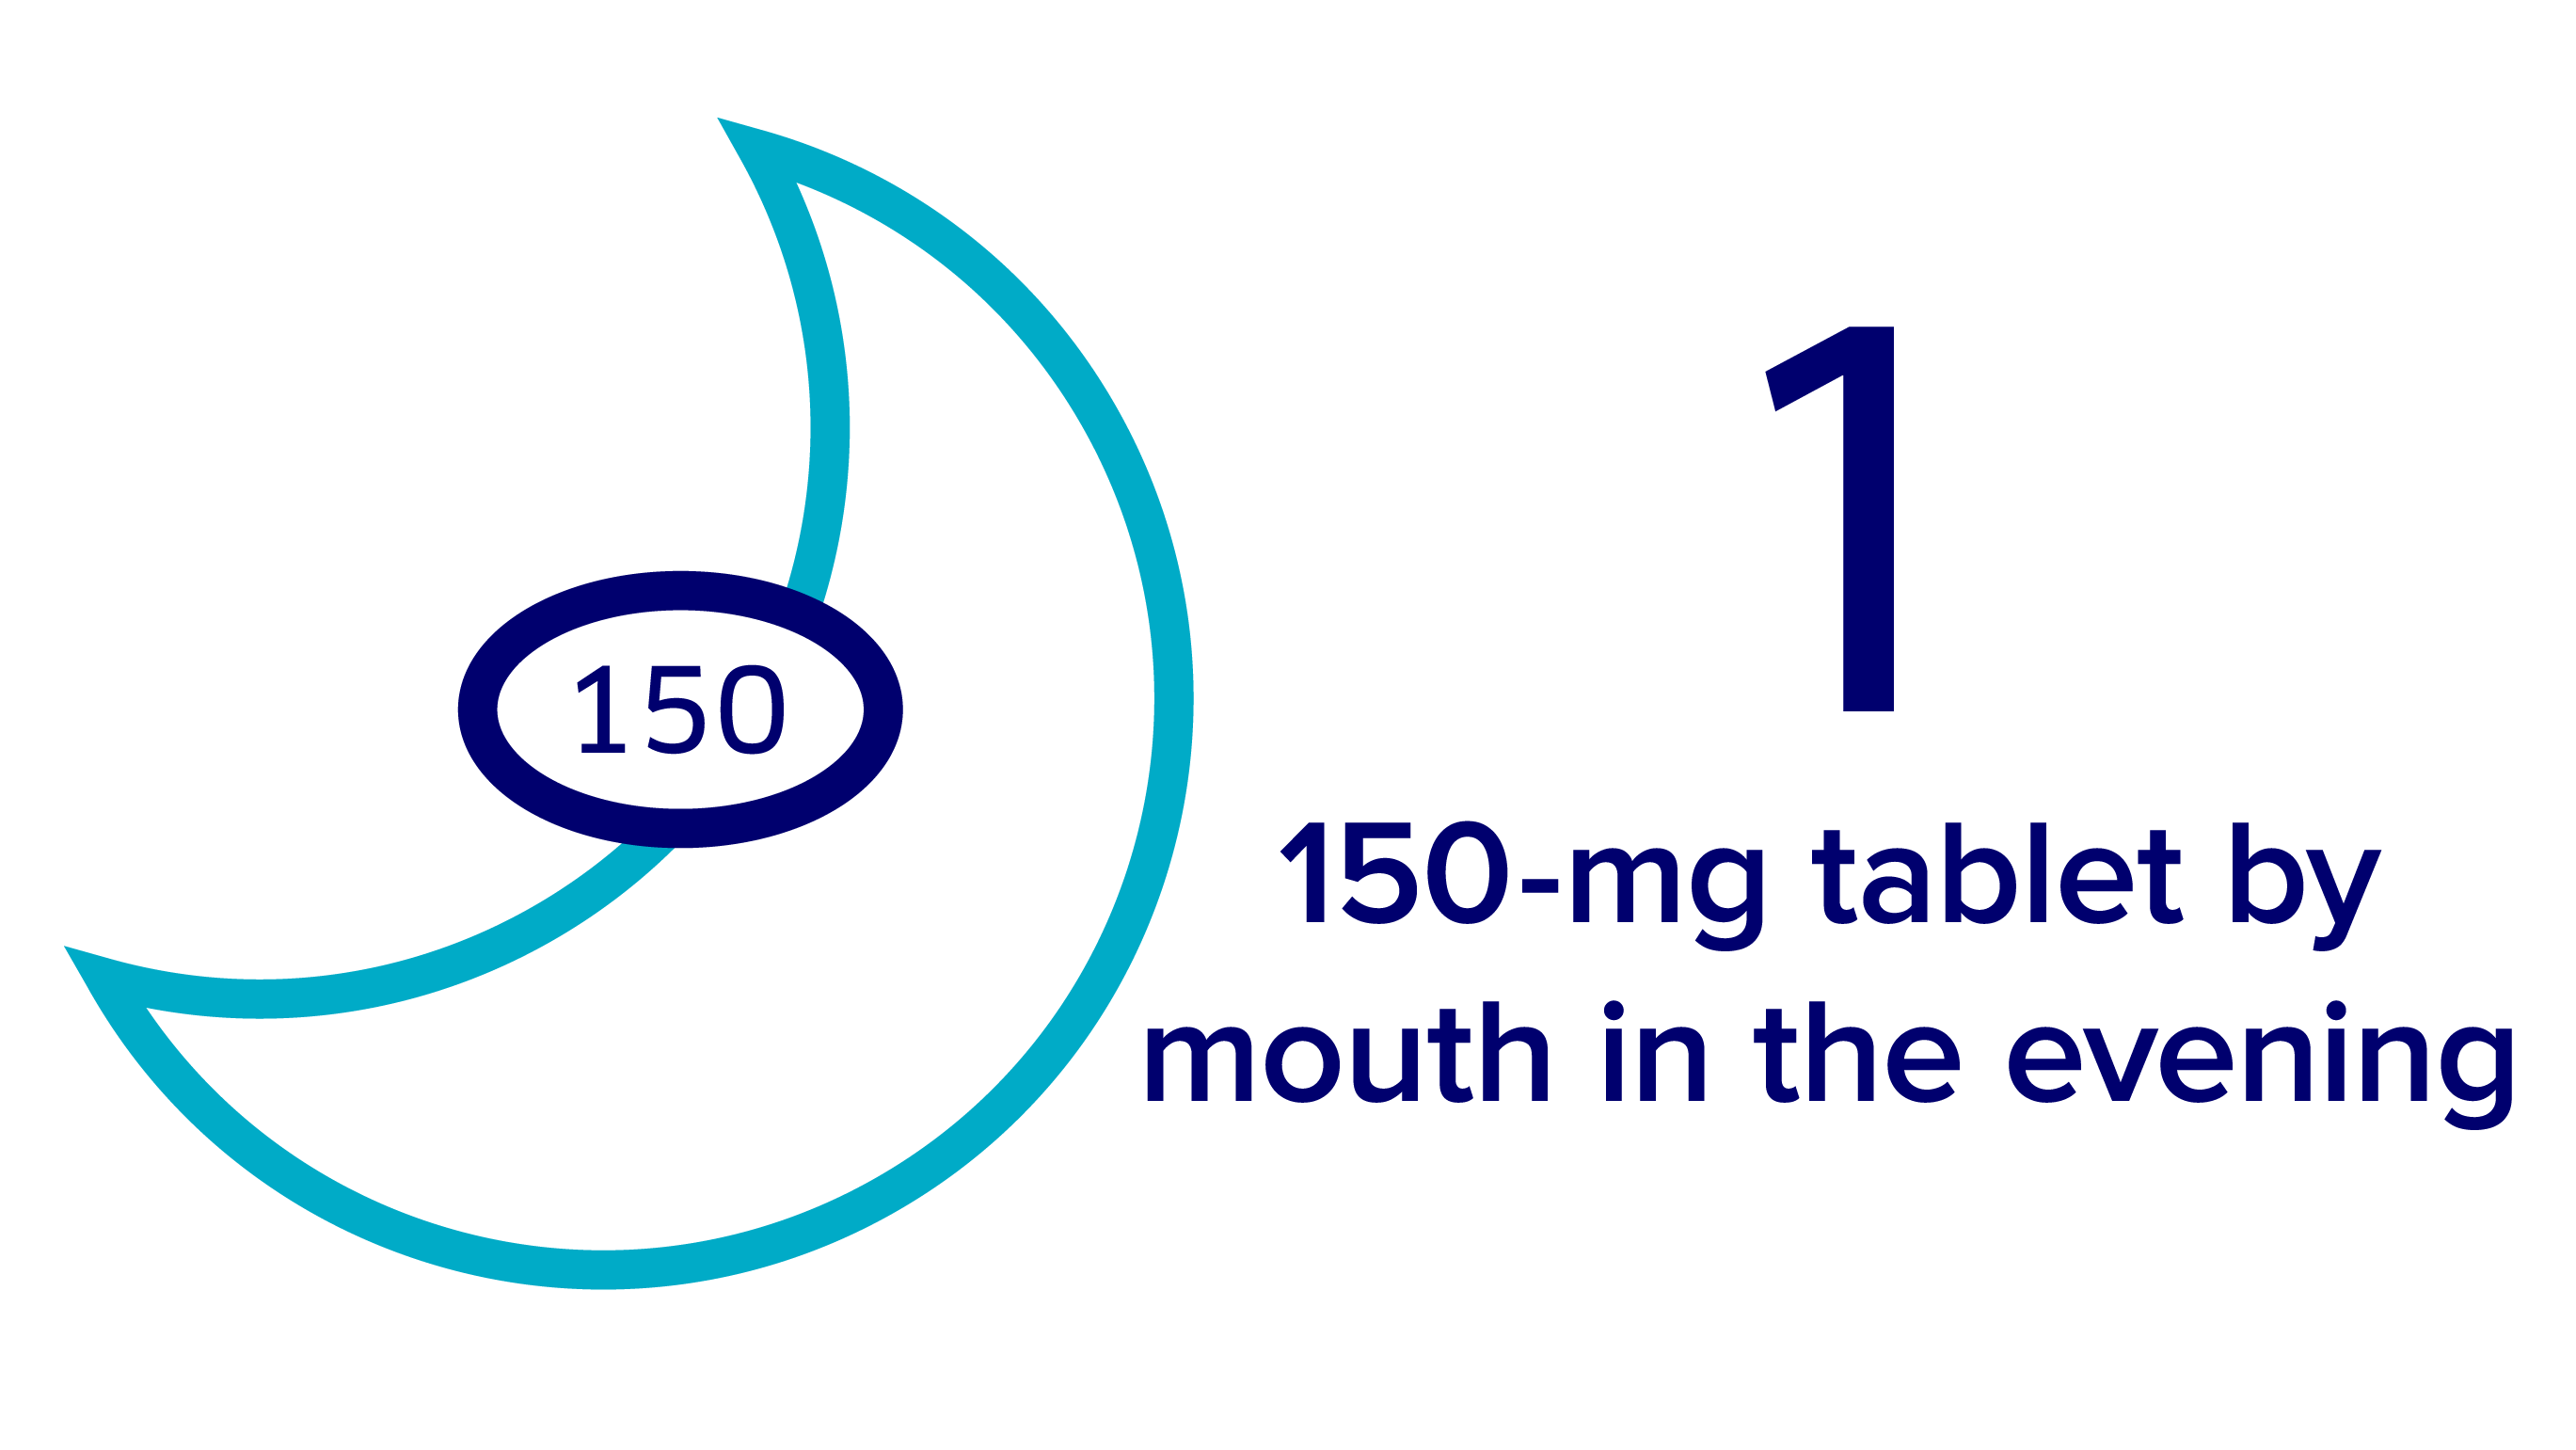 take one 150-mg tablet of Verzenio by mouth in the evening